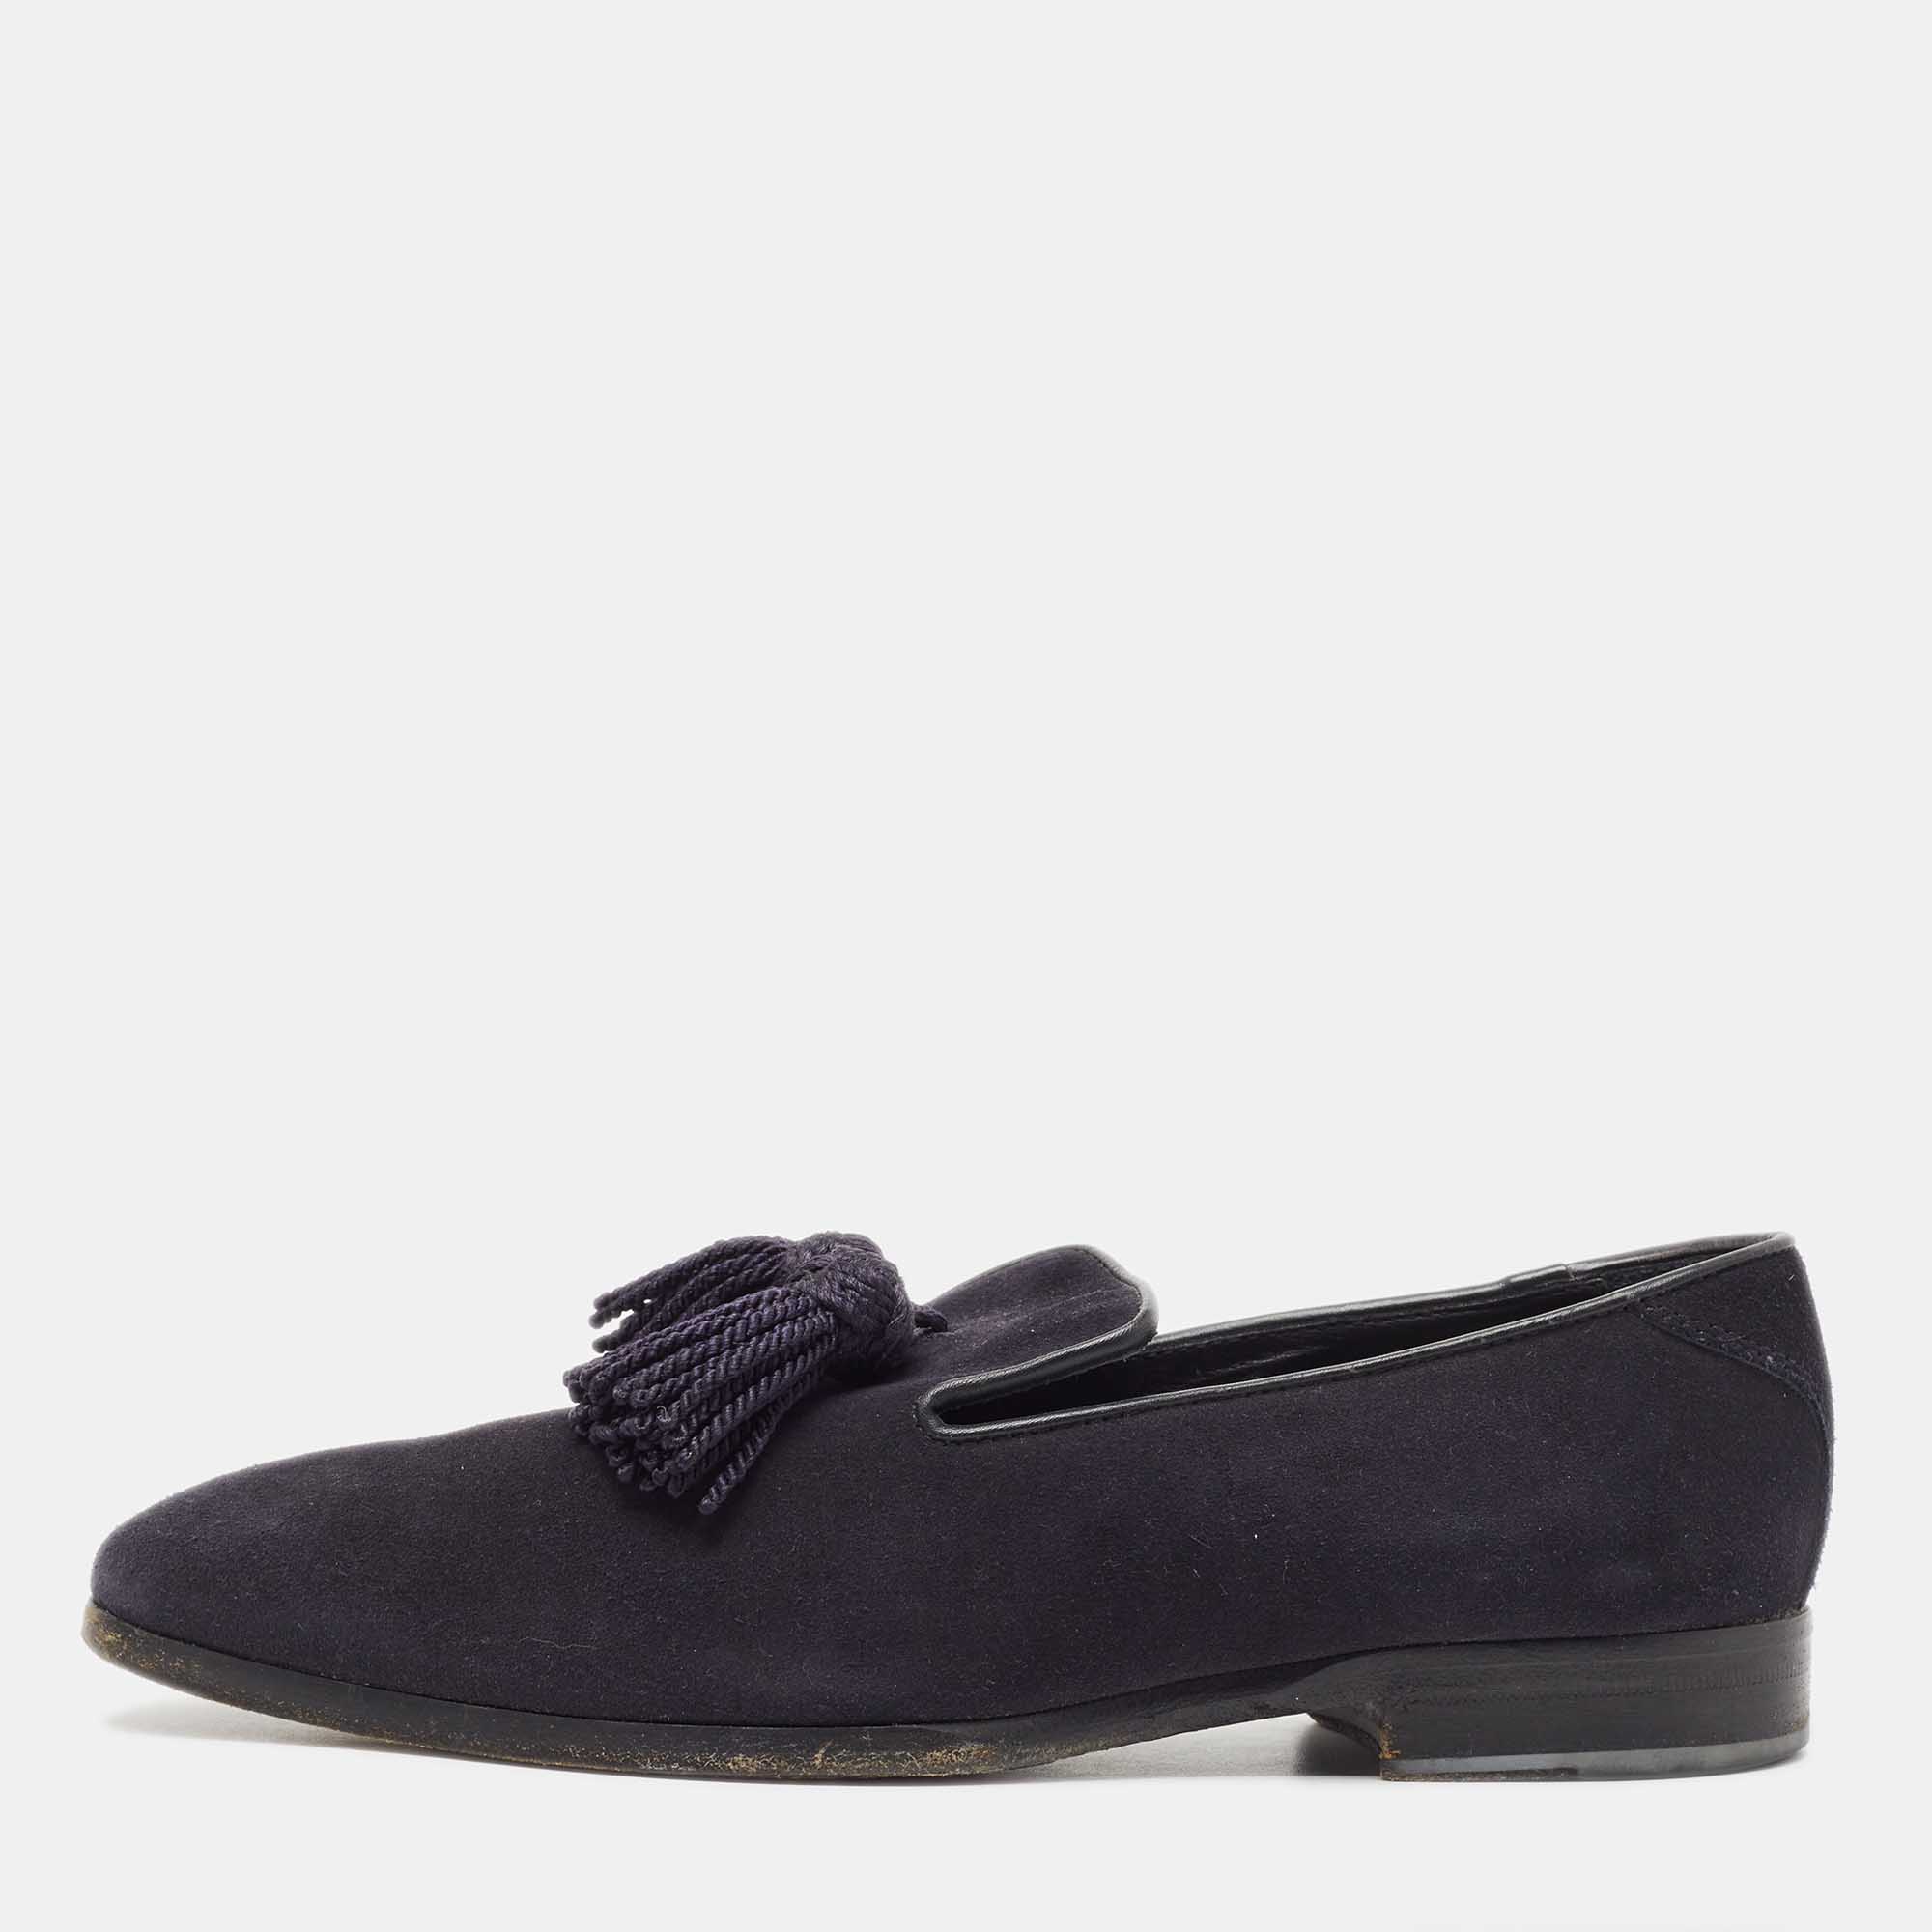 

Jimmy Choo Navy Blue Suede Foxley Smoking Slippers Size